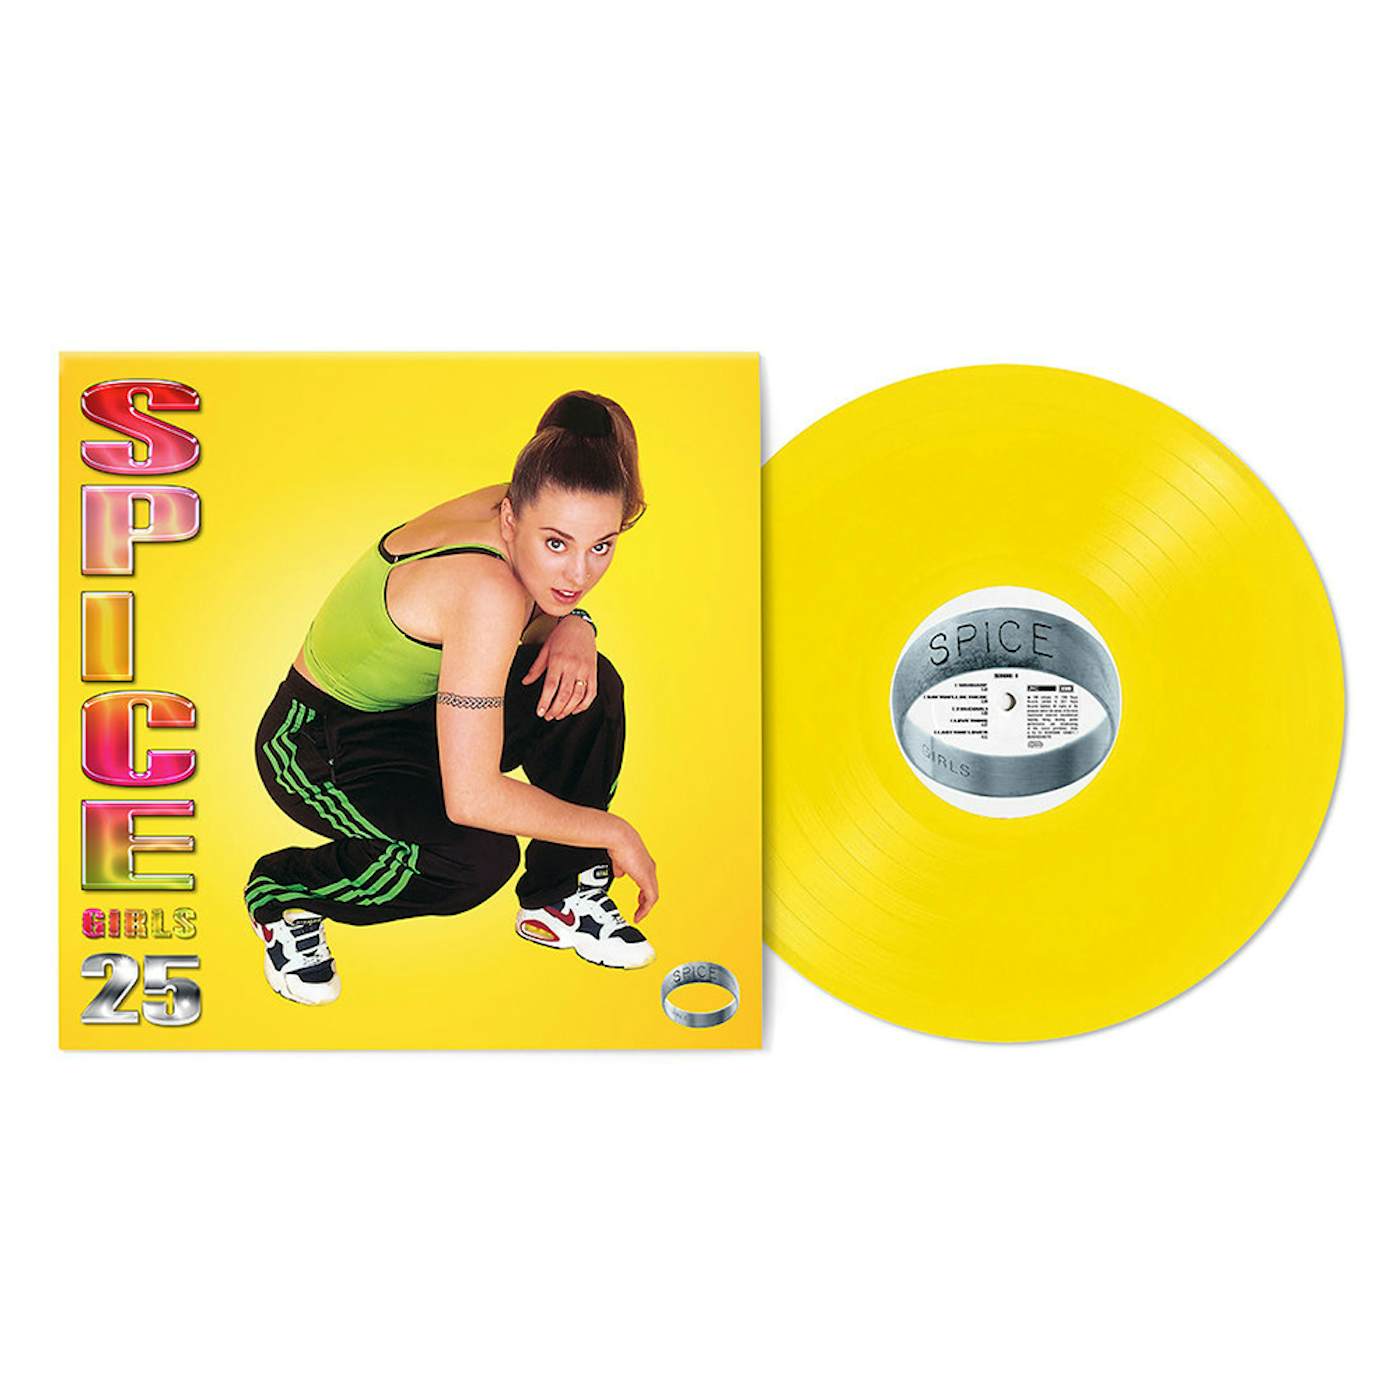 Spice Girls SPICE - 25TH ANNIVERSARY (‘SPORTY’ YELLOW COLORED LP) (Vinyl)